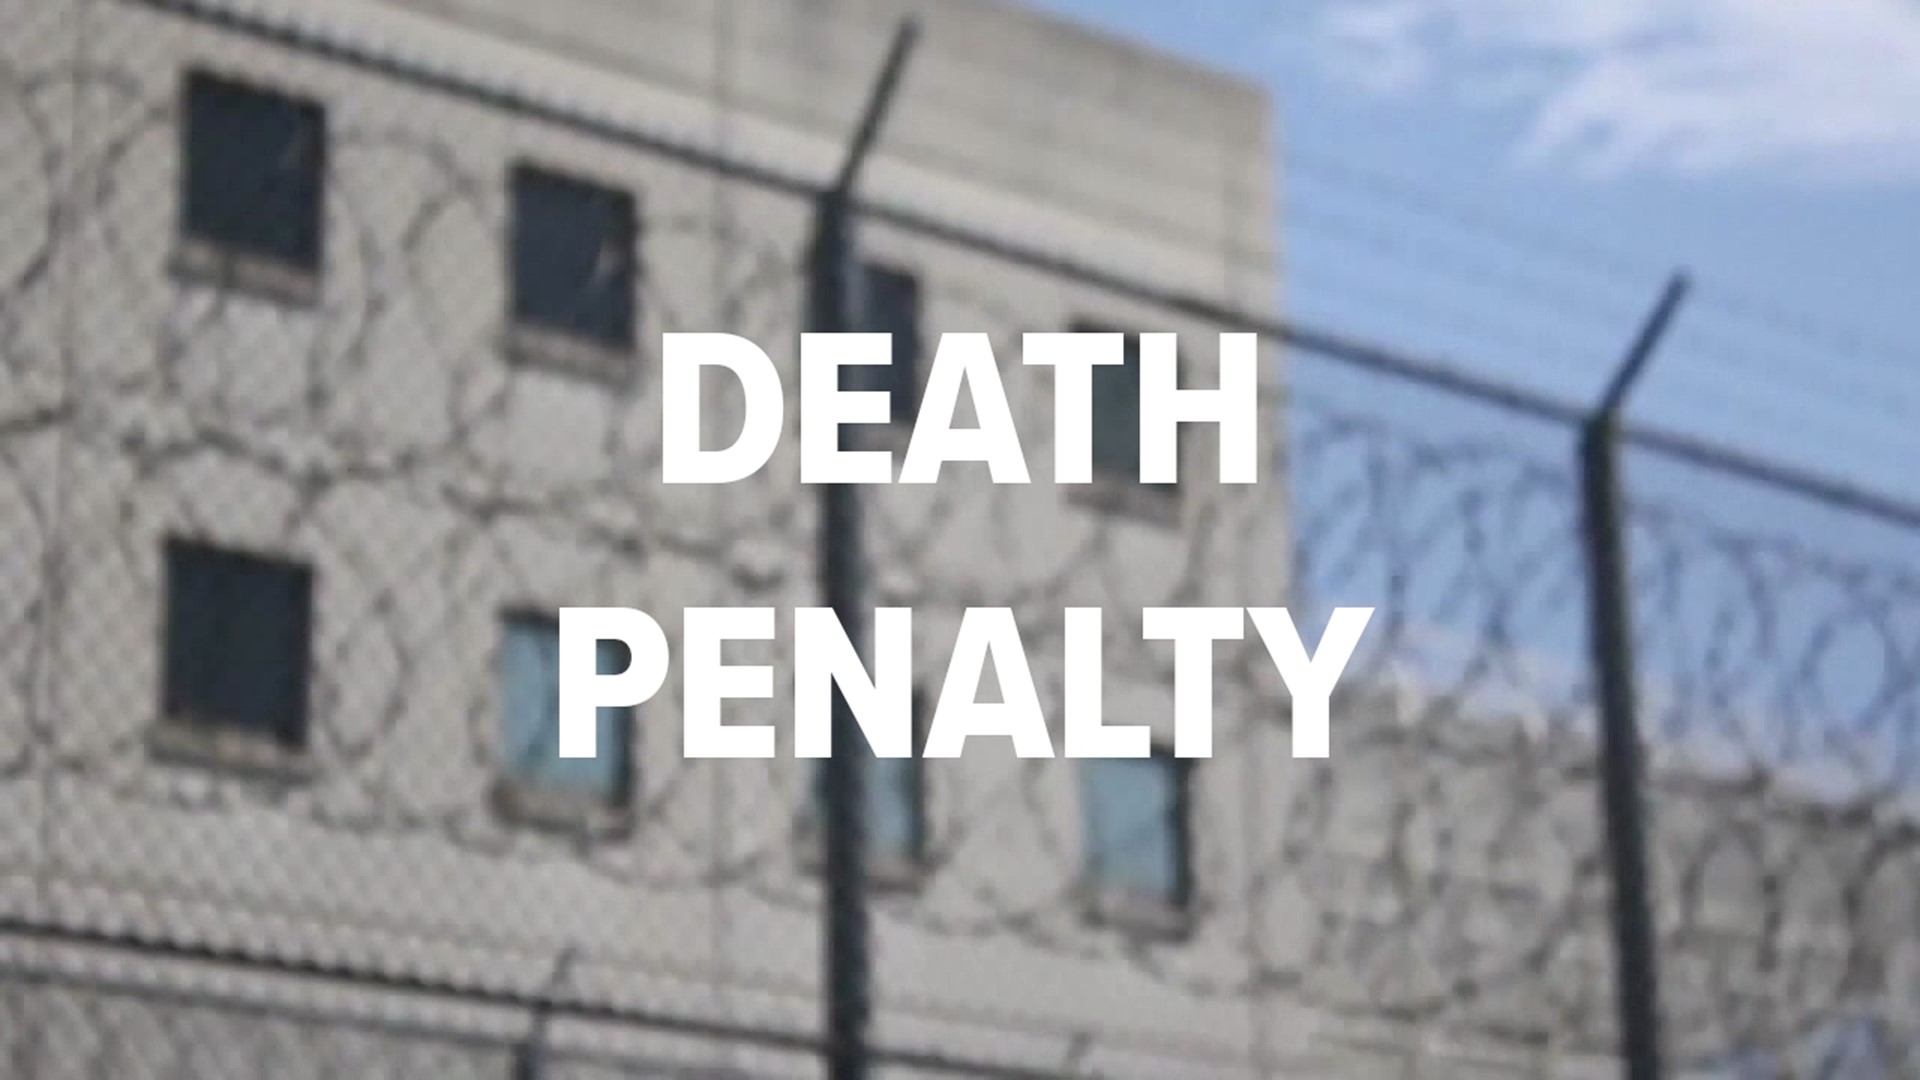 Newswatch 16's Jack Culkin spoke with a county official and area defense attorney in Pennsylvania about their opinions on the death penalty being allowed.